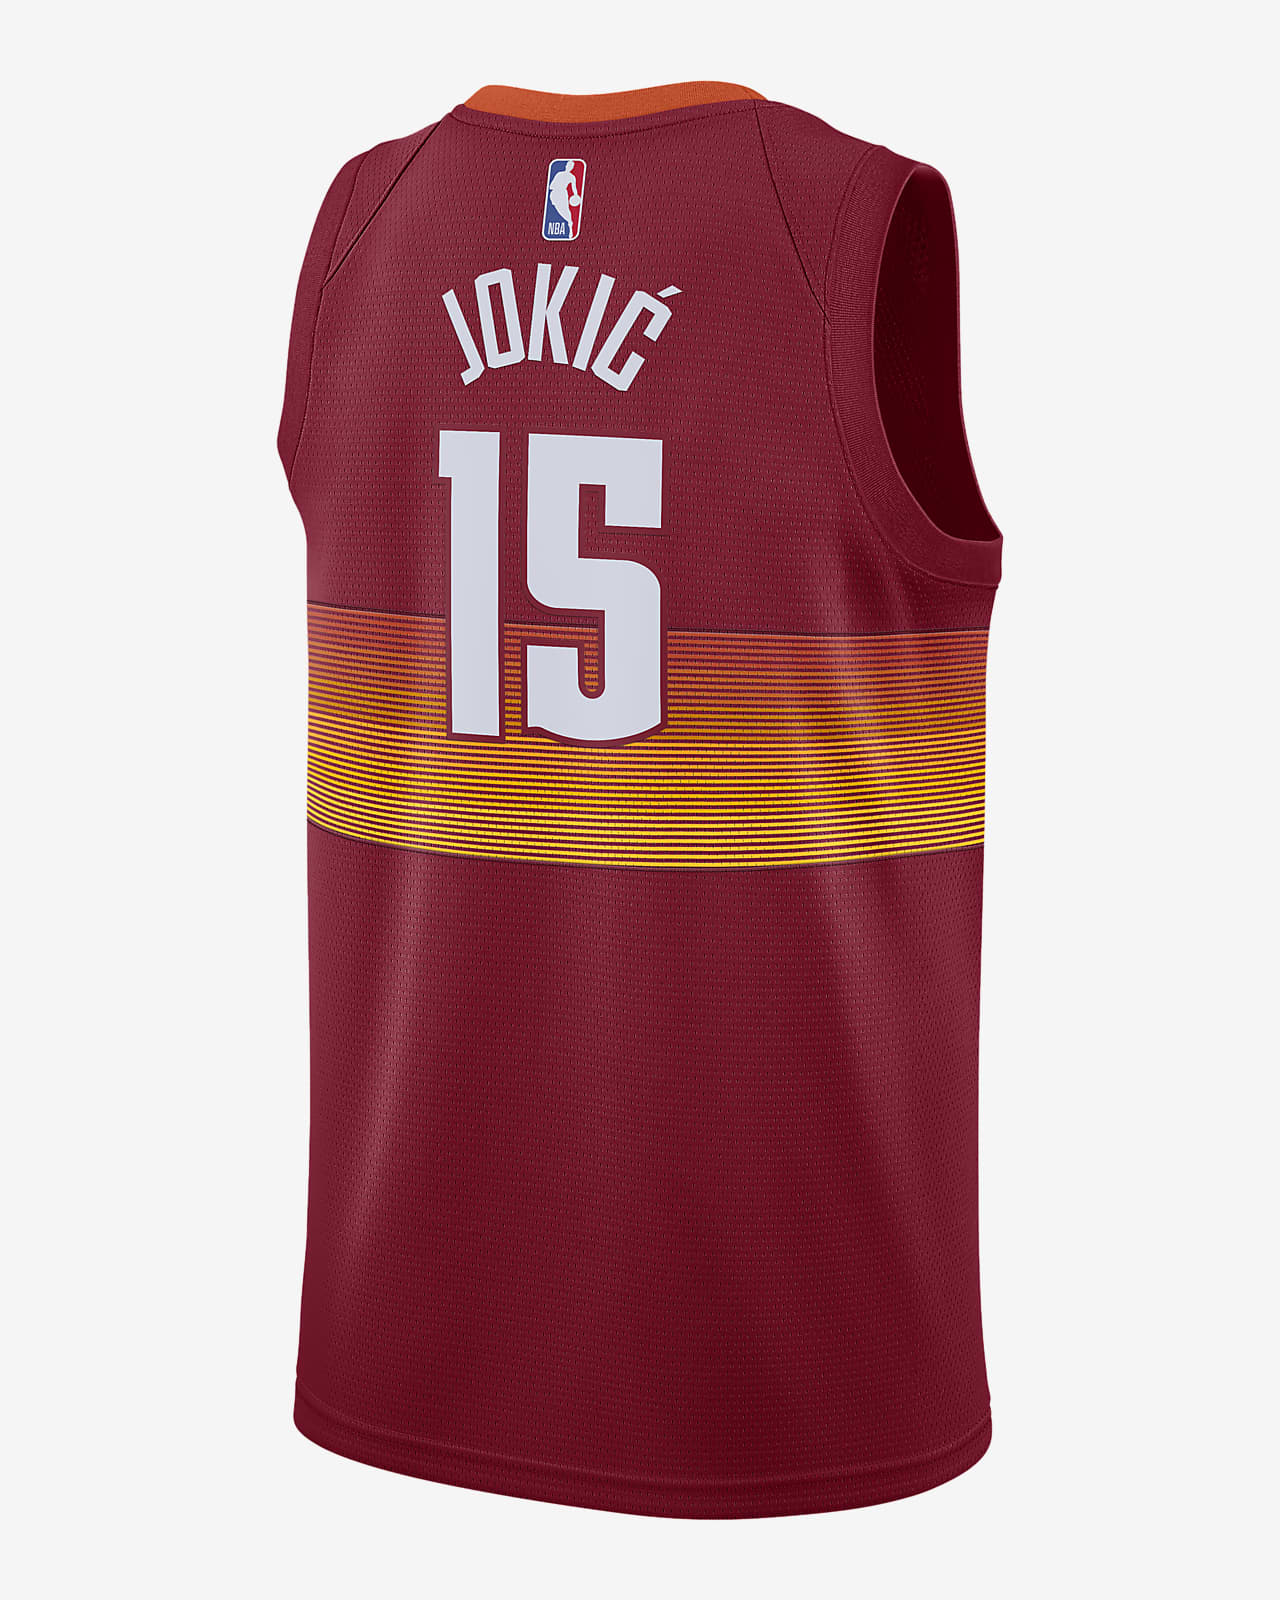 nuggets city jersey